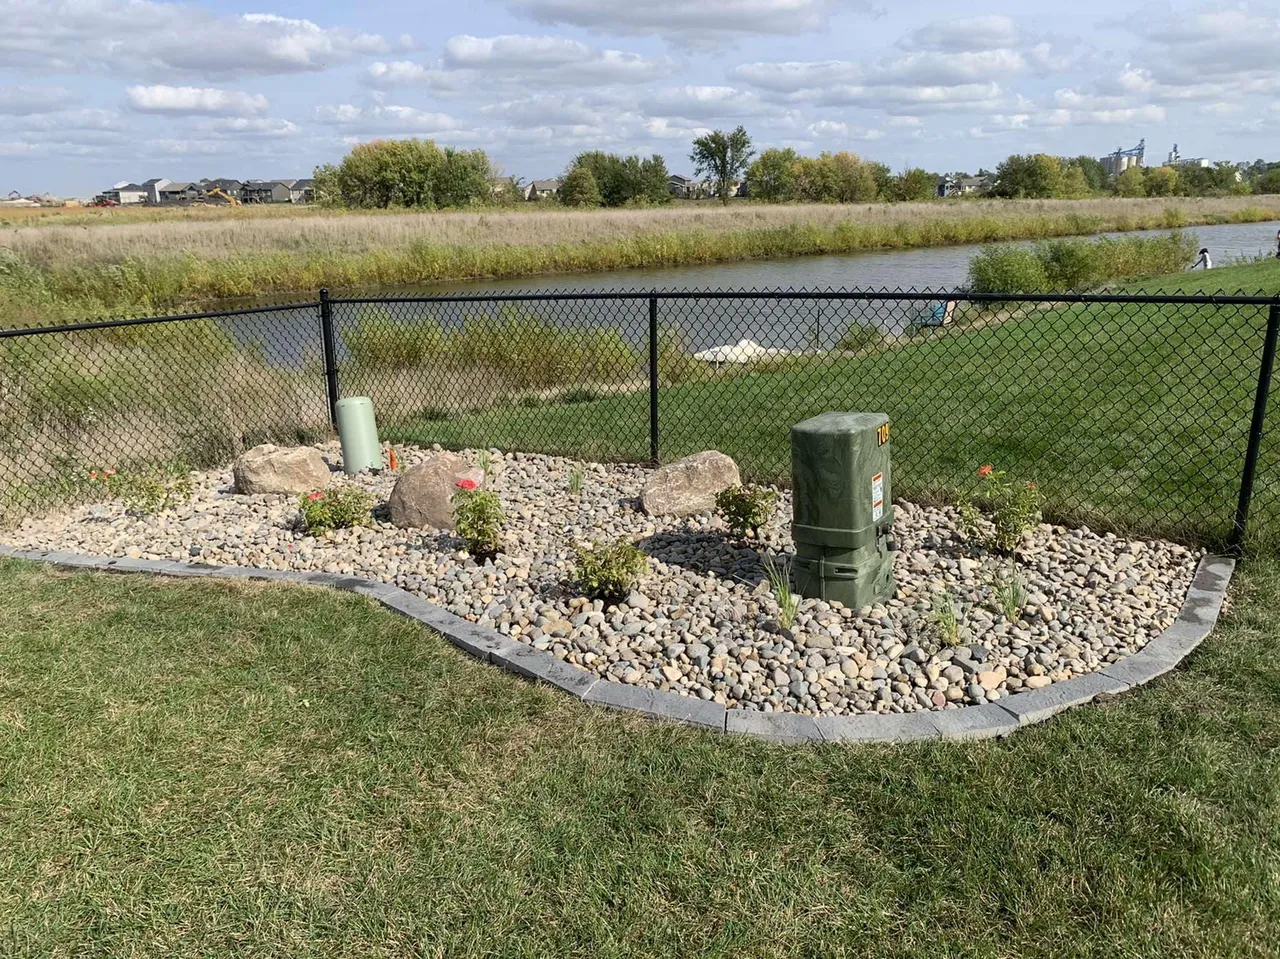 A grassy area with rocks and water.